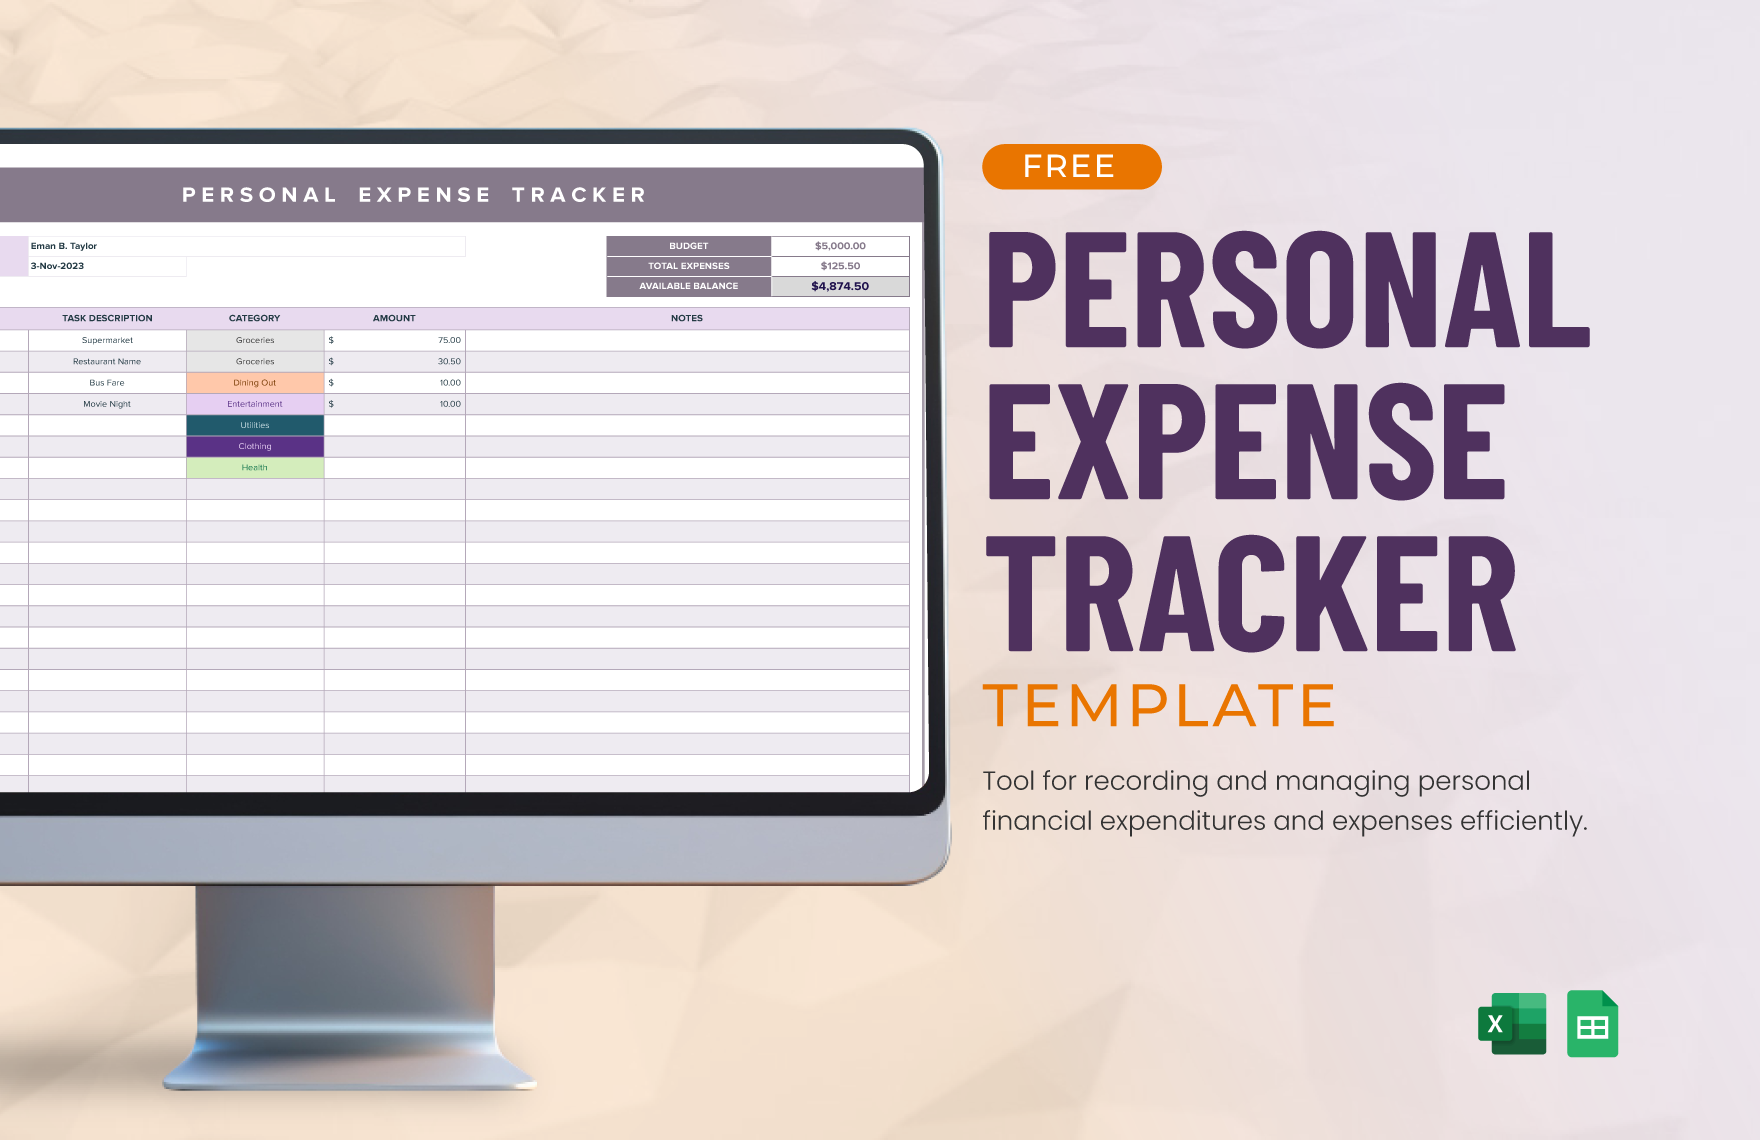 Free Personal Expense Tracker Template in Excel, Google Sheets